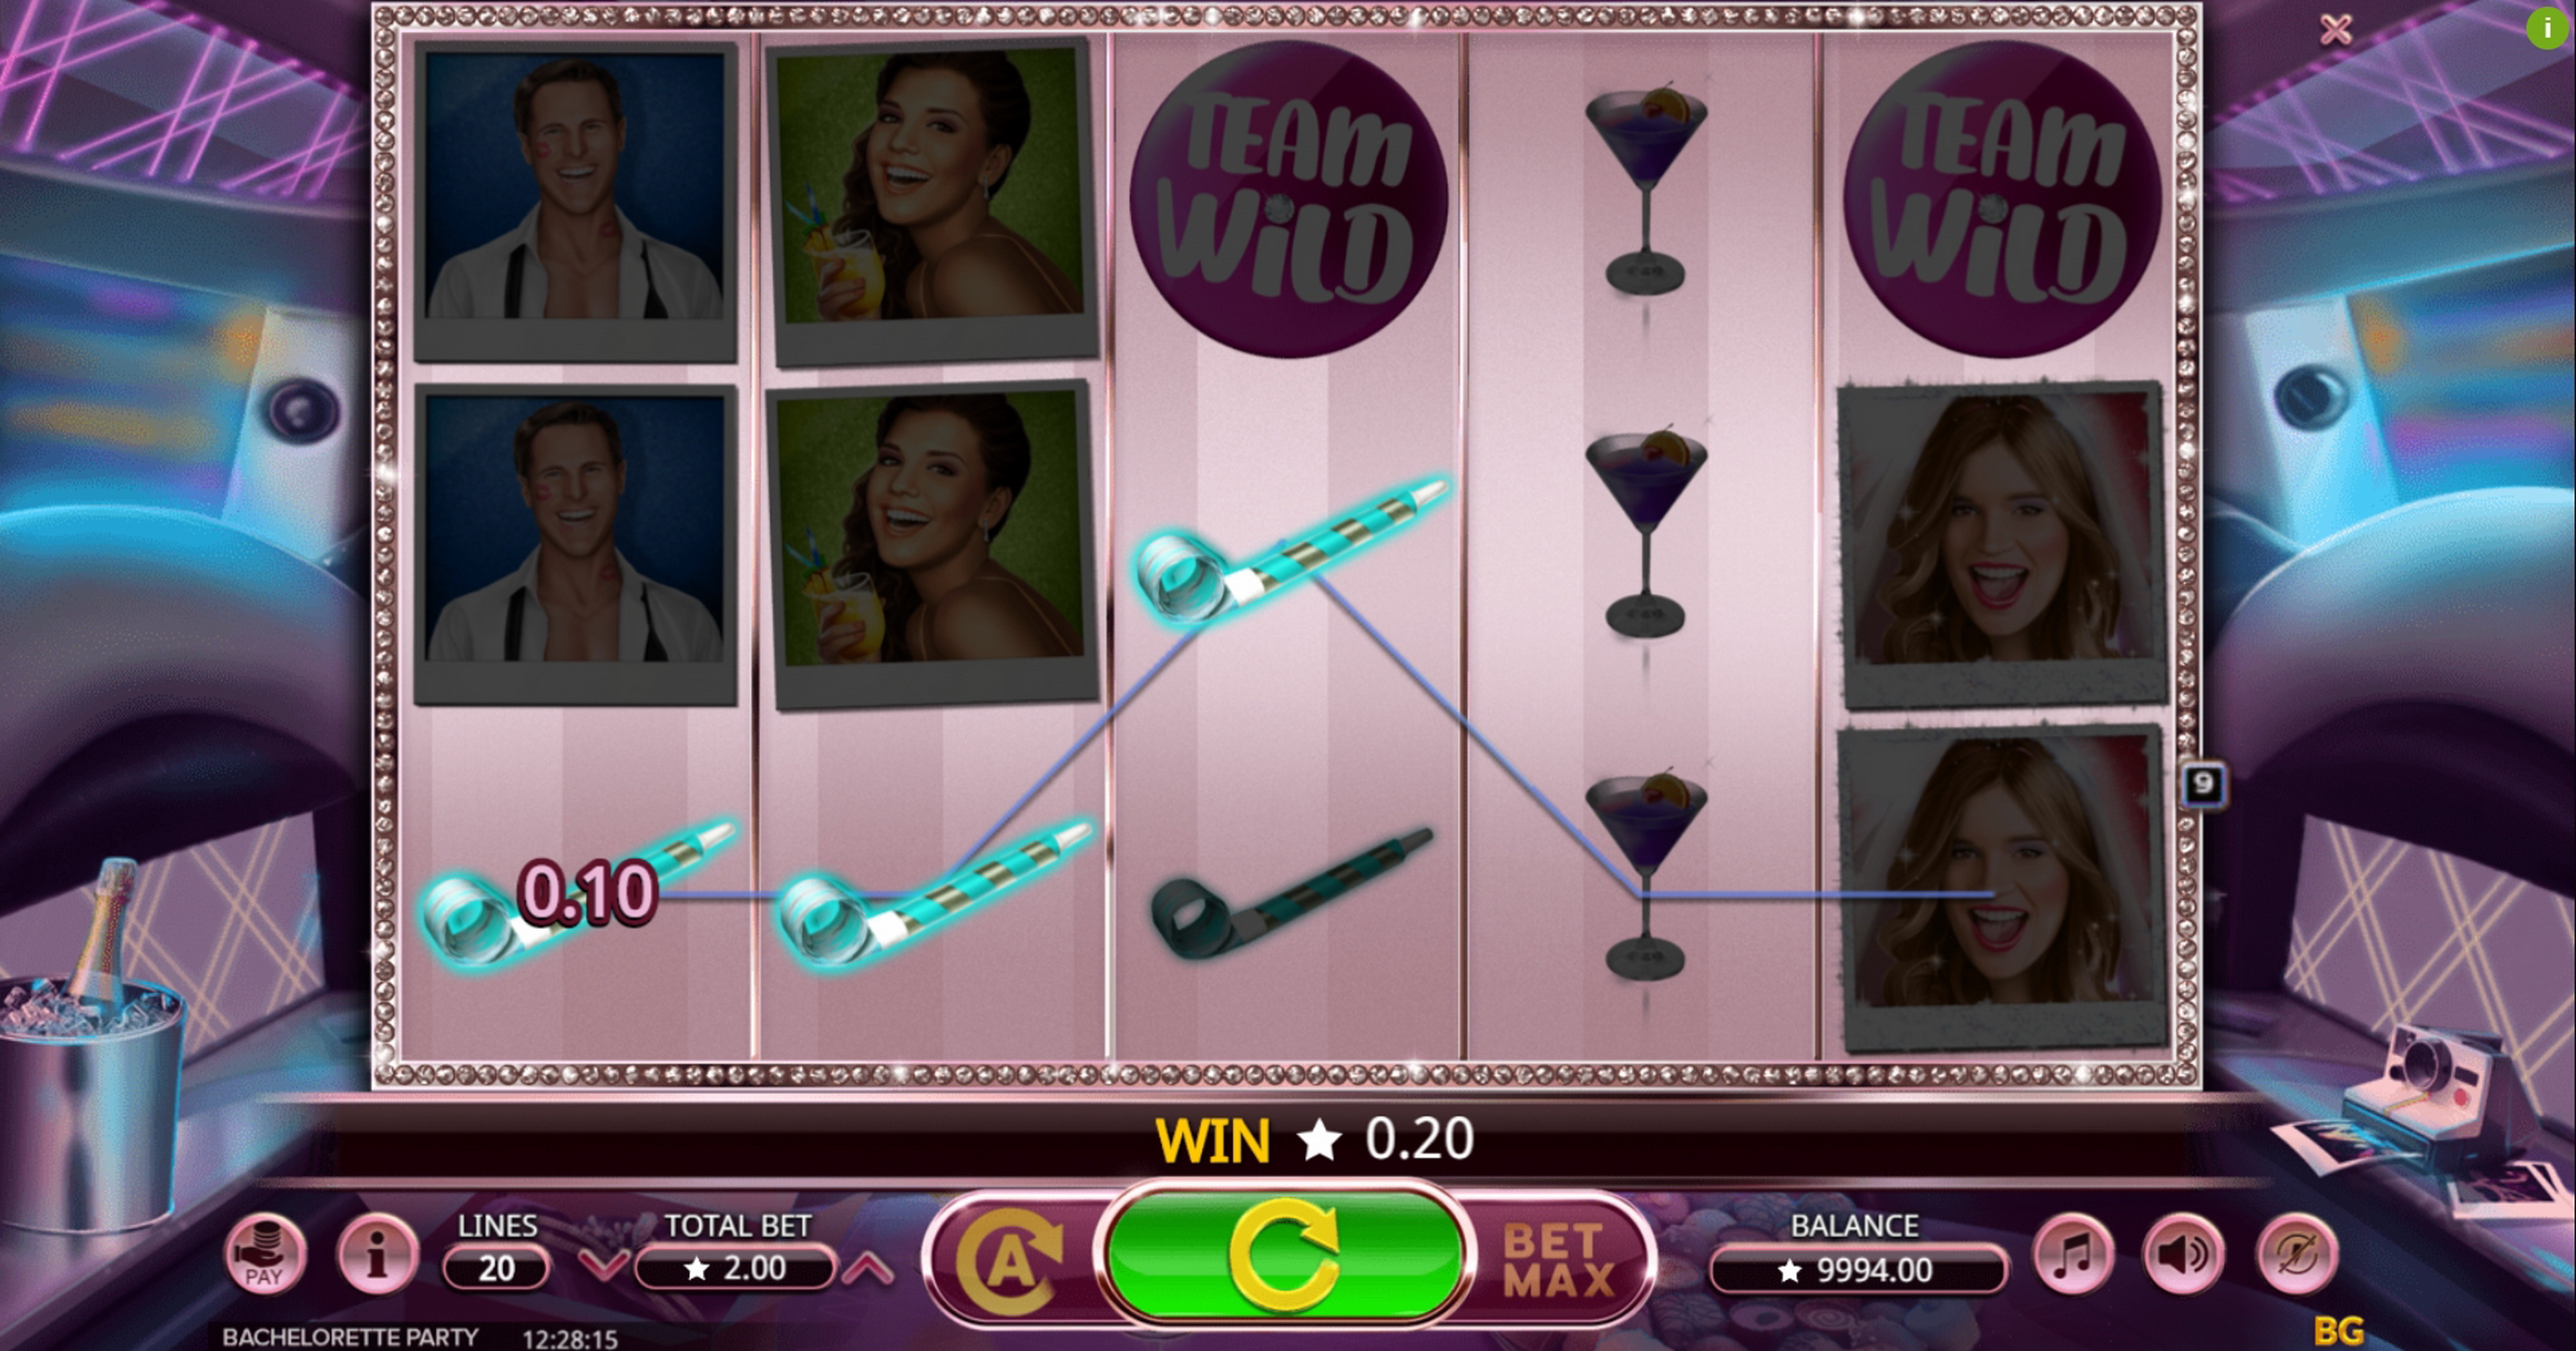 Win Money in Bachelorette Party Free Slot Game by Booming Games